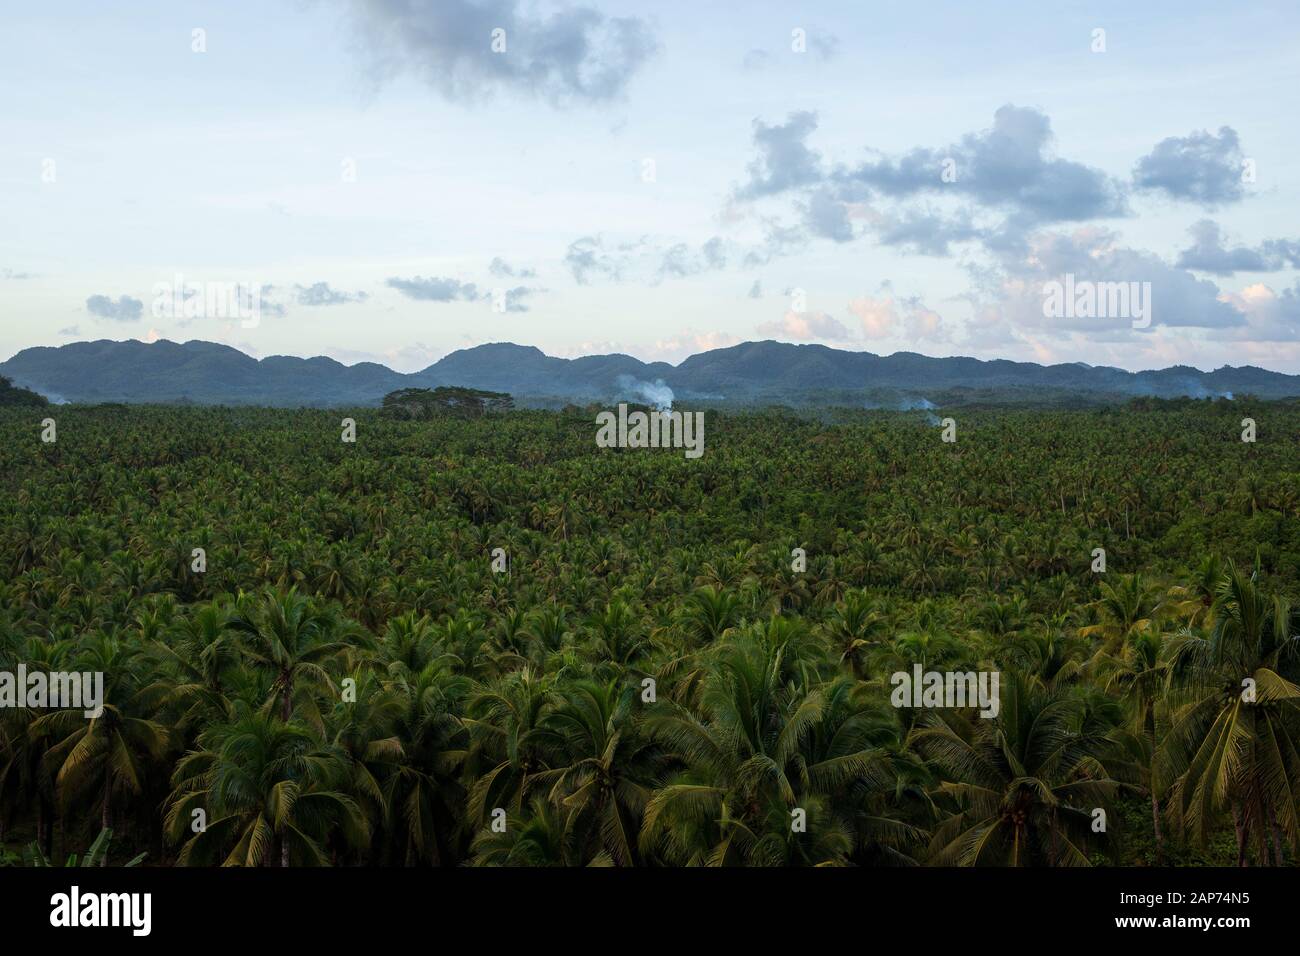 Plumes of smoke rise from dense coconut palm forest as farming villages burn debris Stock Photo